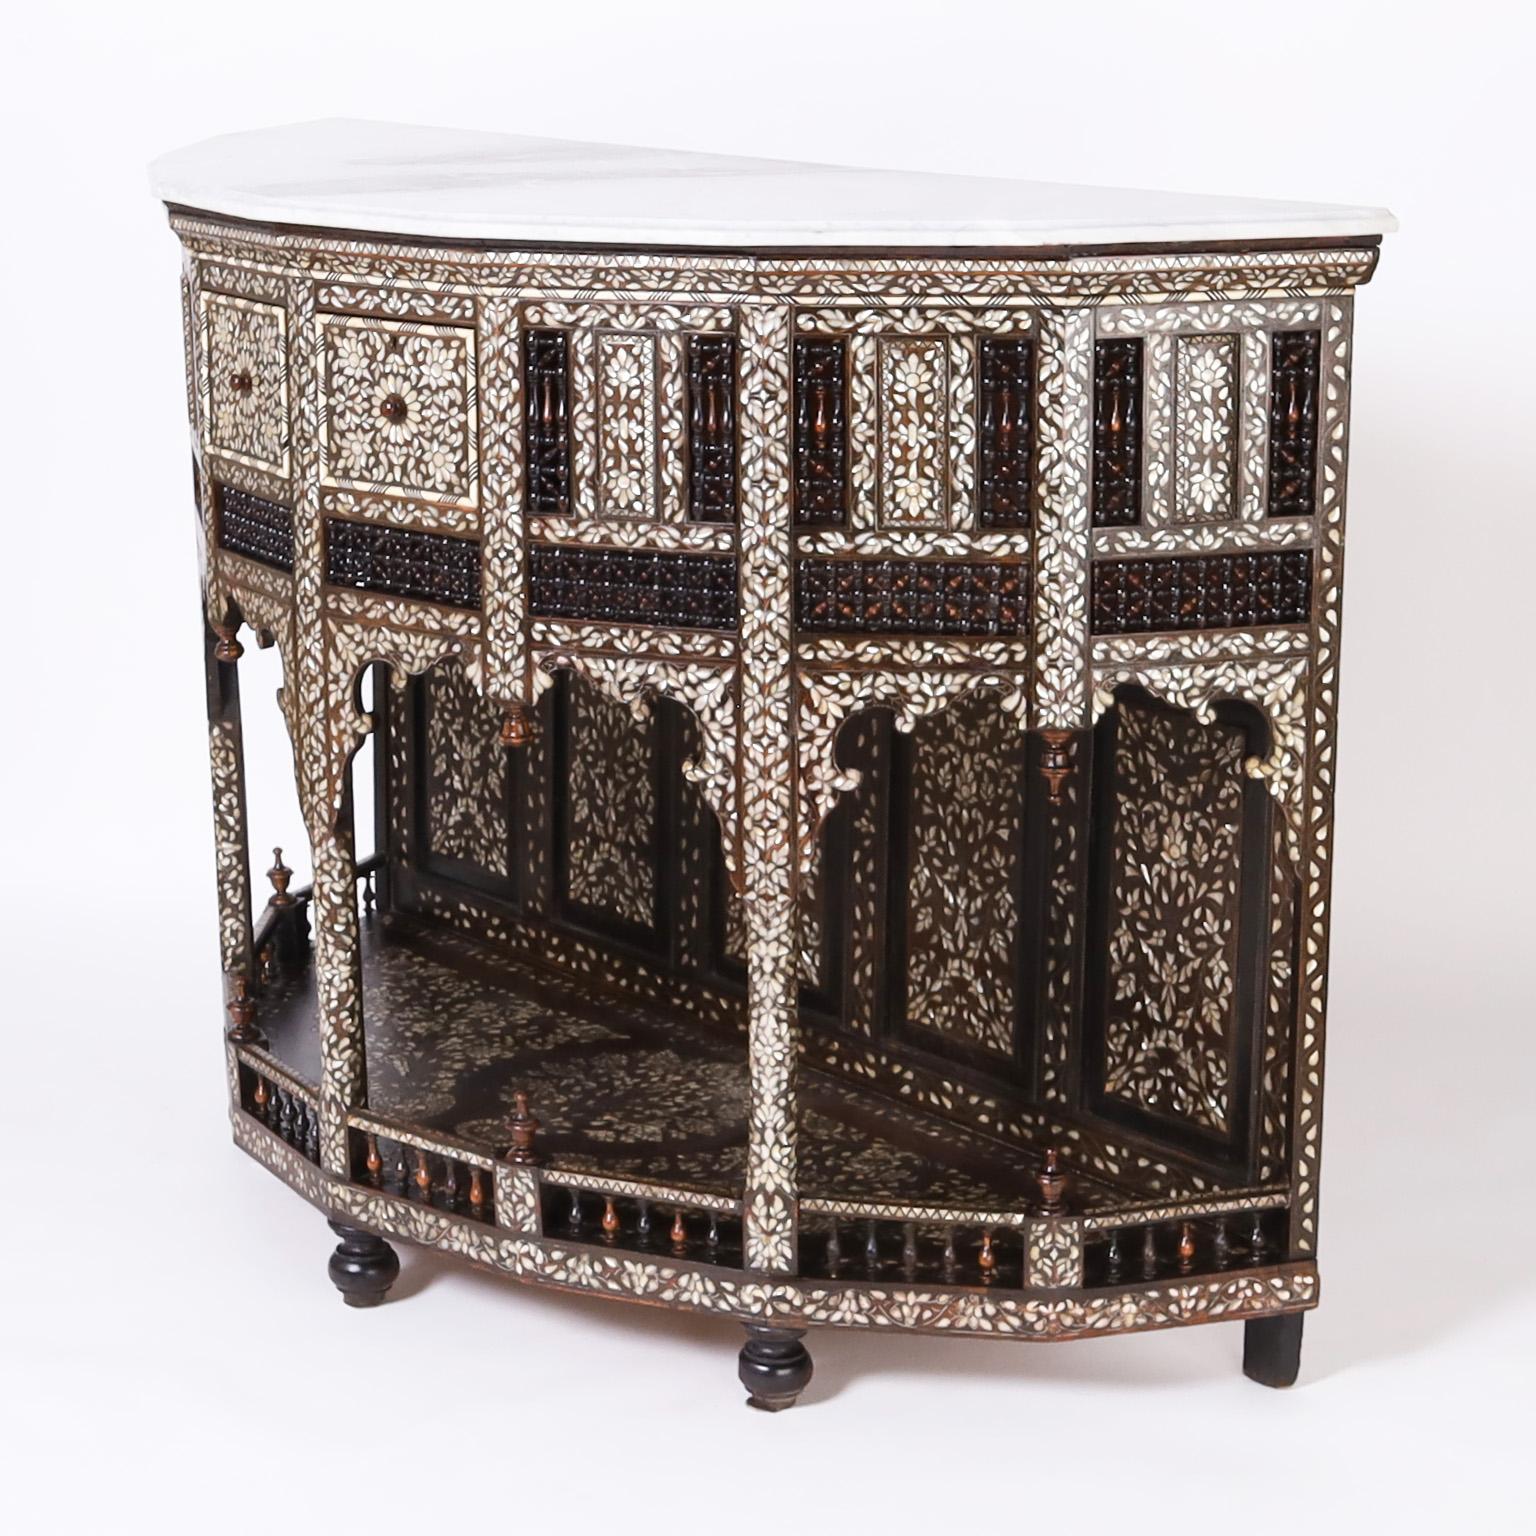 Impressive large scale antique Anglo Indian demi lune console with the original beveled white marble top over an architecturally interesting base crafted in mahogany featuring mother of pearl floral inlays throughout, two drawers, stick and ball